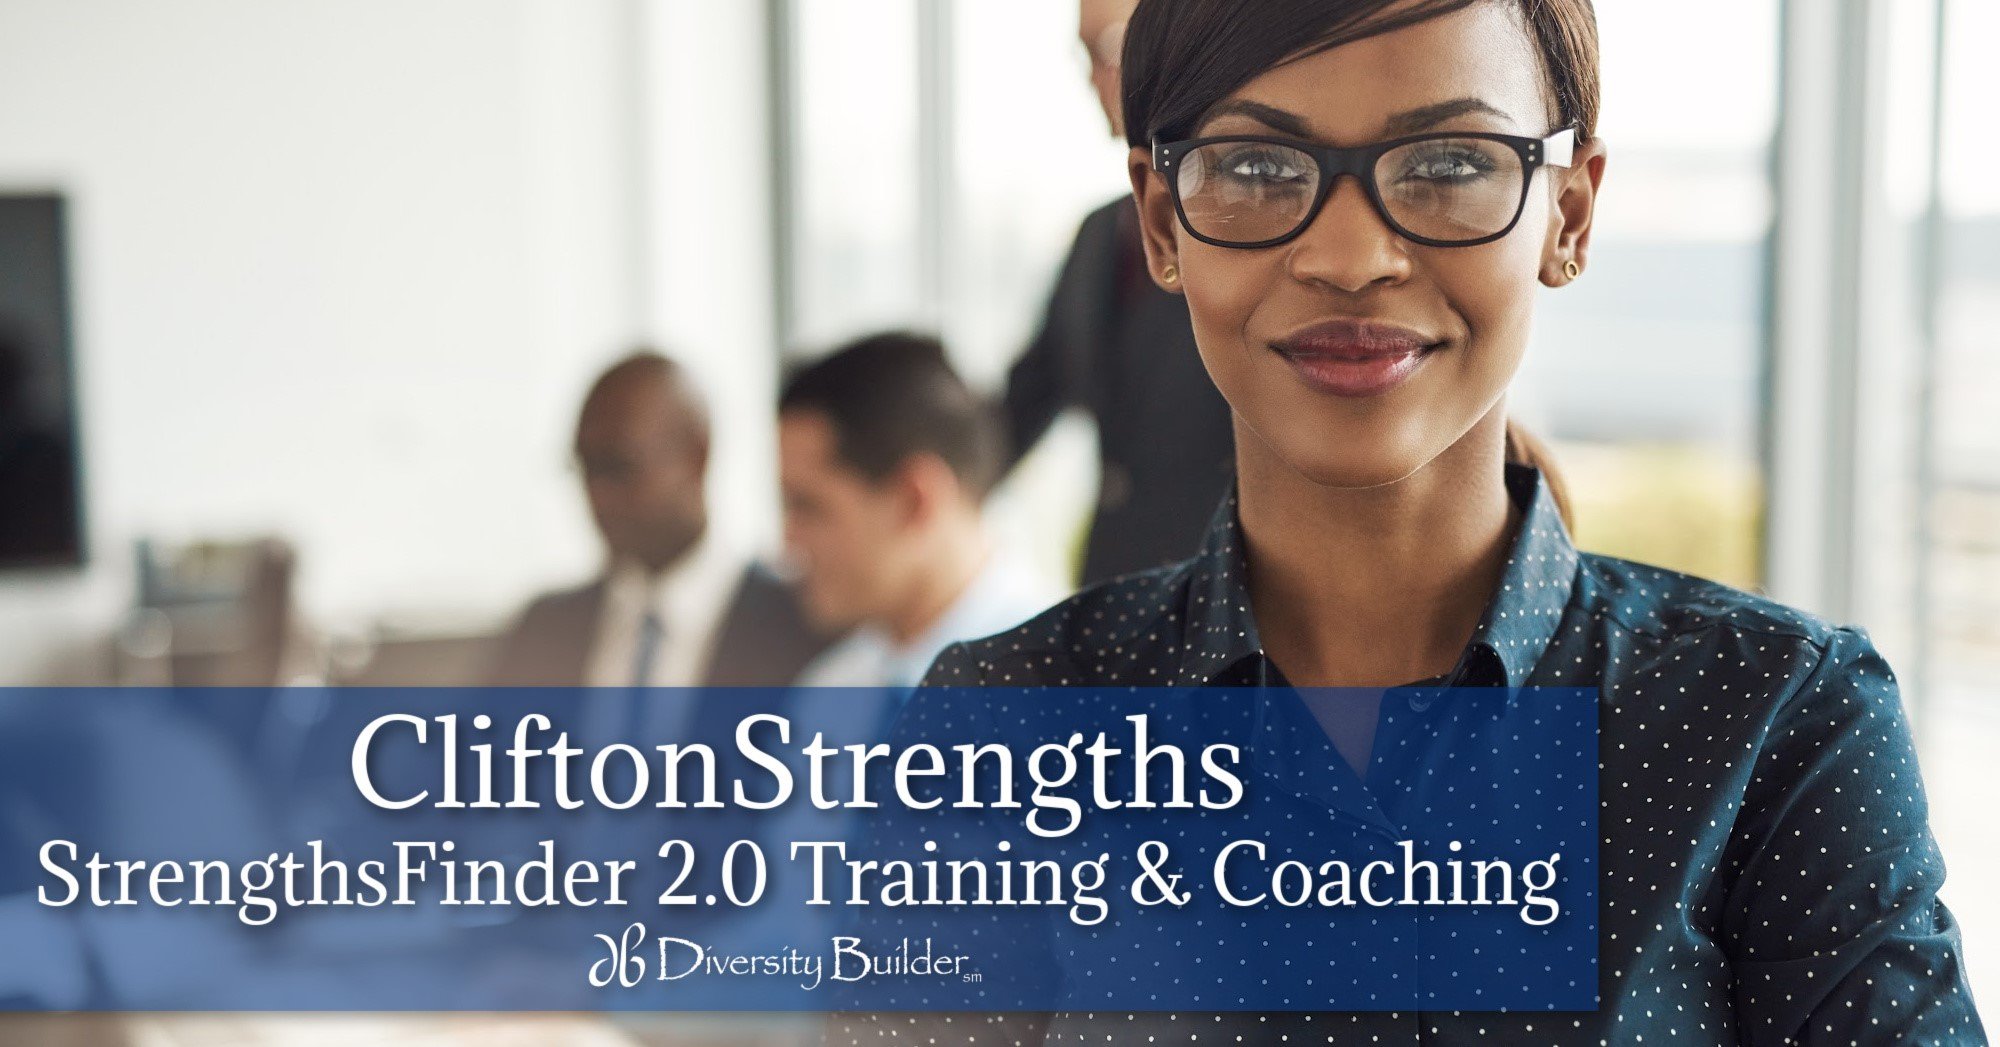 StrengthsFinder Training and Coaching CliftonStrengths Workshops